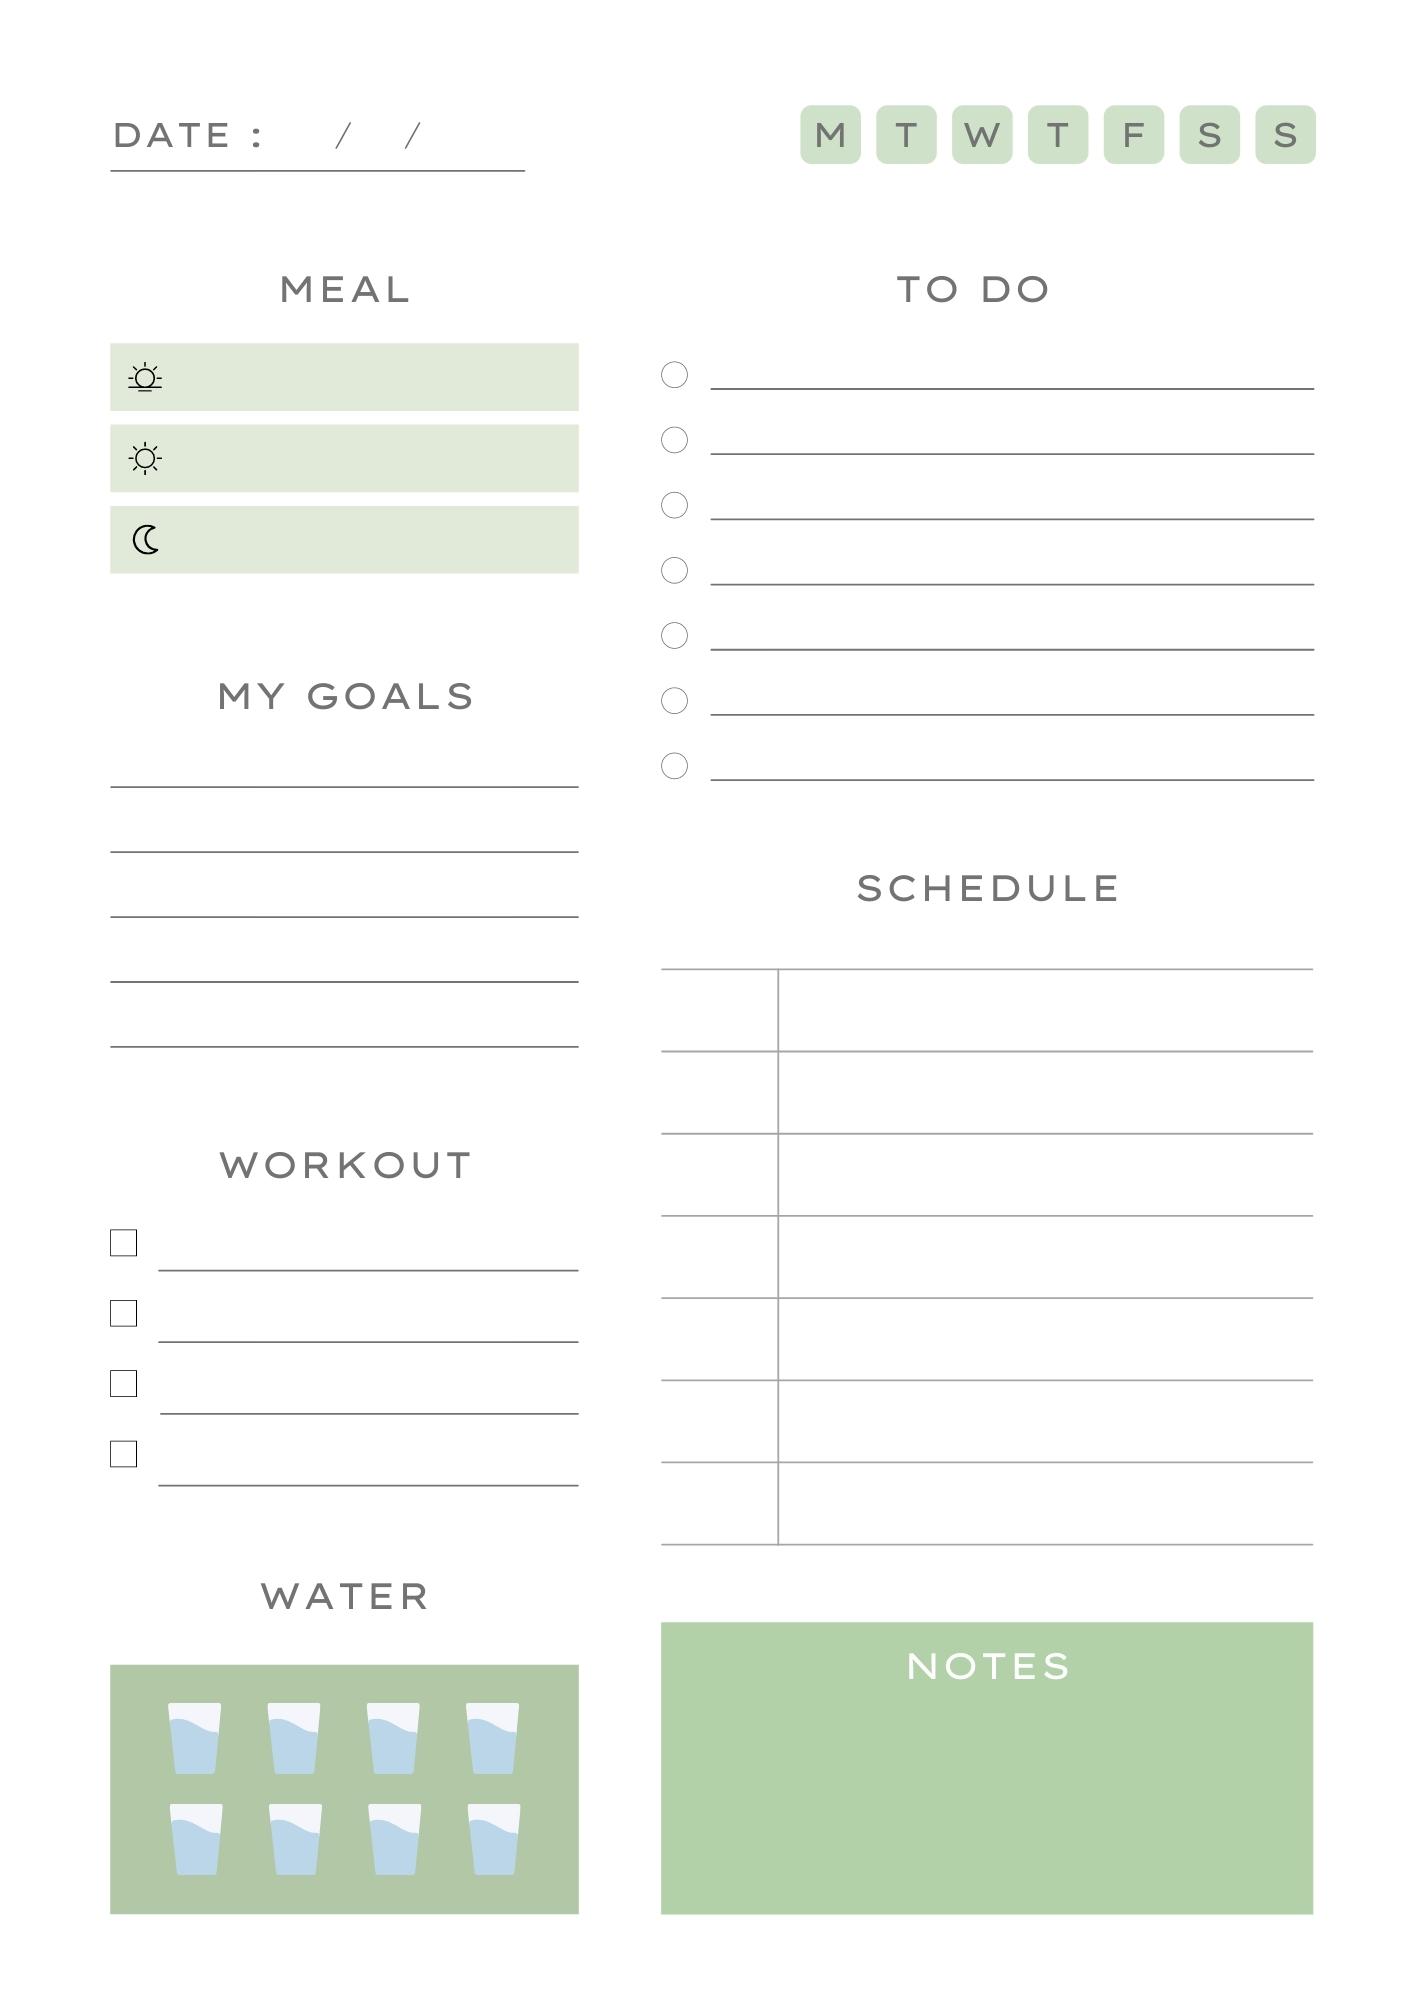 Printable Daily Planner No. 9 - Professional Work Planner – Puffin